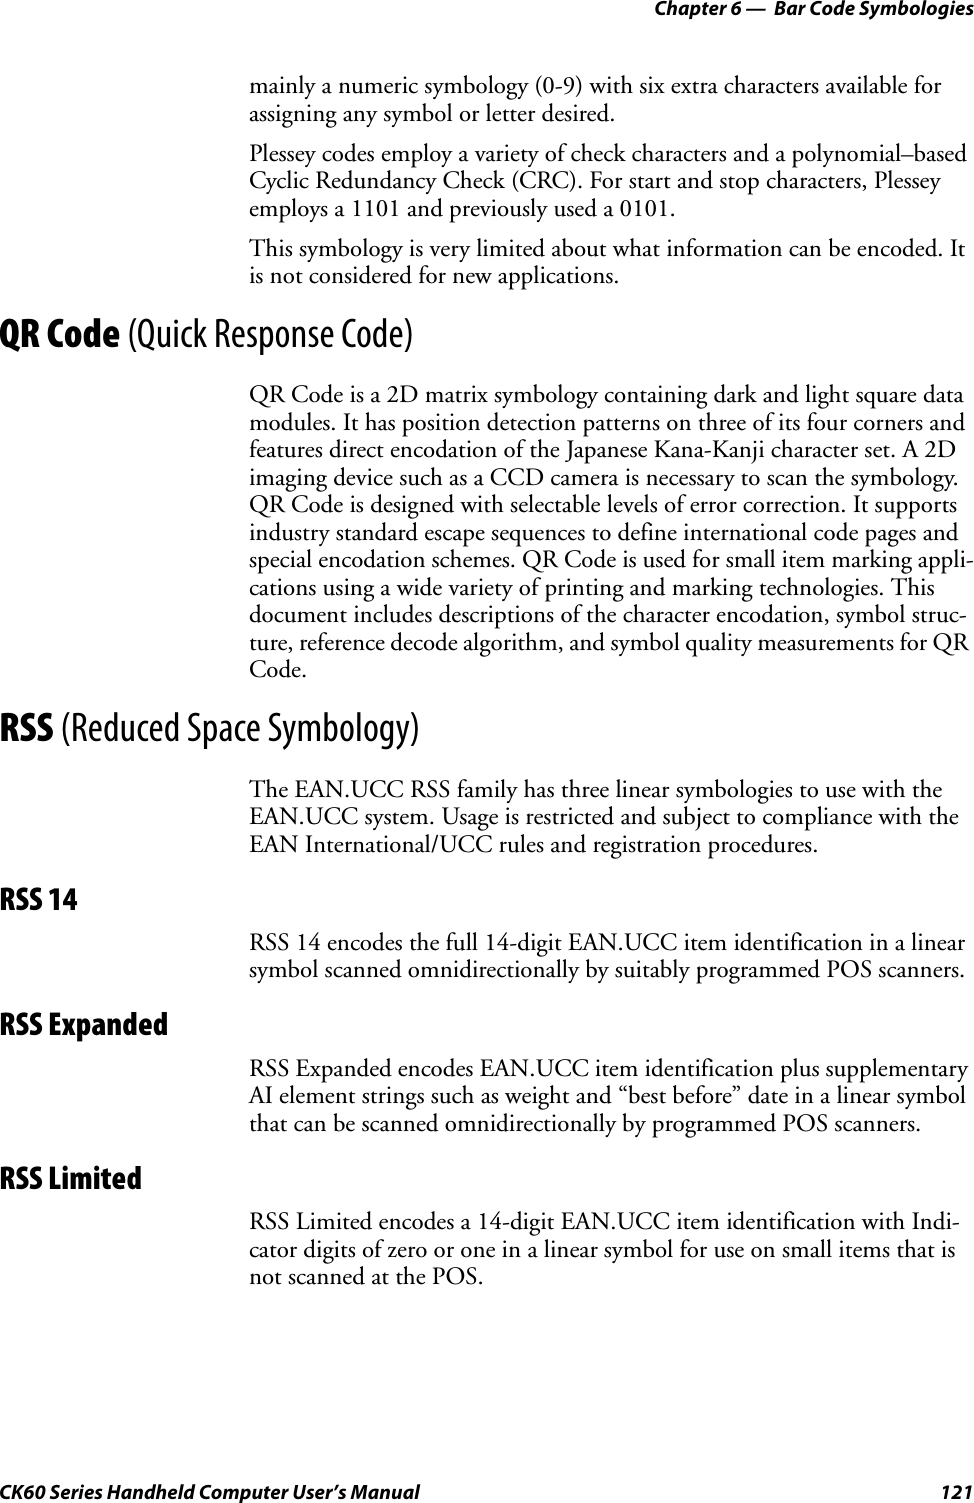 Chapter 6 —  Bar Code SymbologiesCK60 Series Handheld Computer User’s Manual 121mainly a numeric symbology (0-9) with six extra characters available for assigning any symbol or letter desired.Plessey codes employ a variety of check characters and a polynomial–based Cyclic Redundancy Check (CRC). For start and stop characters, Plessey employs a 1101 and previously used a 0101.This symbology is very limited about what information can be encoded. It is not considered for new applications.QR Code (Quick Response Code)QR Code is a 2D matrix symbology containing dark and light square data modules. It has position detection patterns on three of its four corners and features direct encodation of the Japanese Kana-Kanji character set. A 2D imaging device such as a CCD camera is necessary to scan the symbology. QR Code is designed with selectable levels of error correction. It supports industry standard escape sequences to define international code pages and special encodation schemes. QR Code is used for small item marking appli-cations using a wide variety of printing and marking technologies. This document includes descriptions of the character encodation, symbol struc-ture, reference decode algorithm, and symbol quality measurements for QR Code.RSS (Reduced Space Symbology)The EAN.UCC RSS family has three linear symbologies to use with the EAN.UCC system. Usage is restricted and subject to compliance with the EAN International/UCC rules and registration procedures.RSS 14RSS 14 encodes the full 14-digit EAN.UCC item identification in a linear symbol scanned omnidirectionally by suitably programmed POS scanners. RSS ExpandedRSS Expanded encodes EAN.UCC item identification plus supplementary AI element strings such as weight and “best before” date in a linear symbol that can be scanned omnidirectionally by programmed POS scanners.RSS LimitedRSS Limited encodes a 14-digit EAN.UCC item identification with Indi-cator digits of zero or one in a linear symbol for use on small items that is not scanned at the POS.